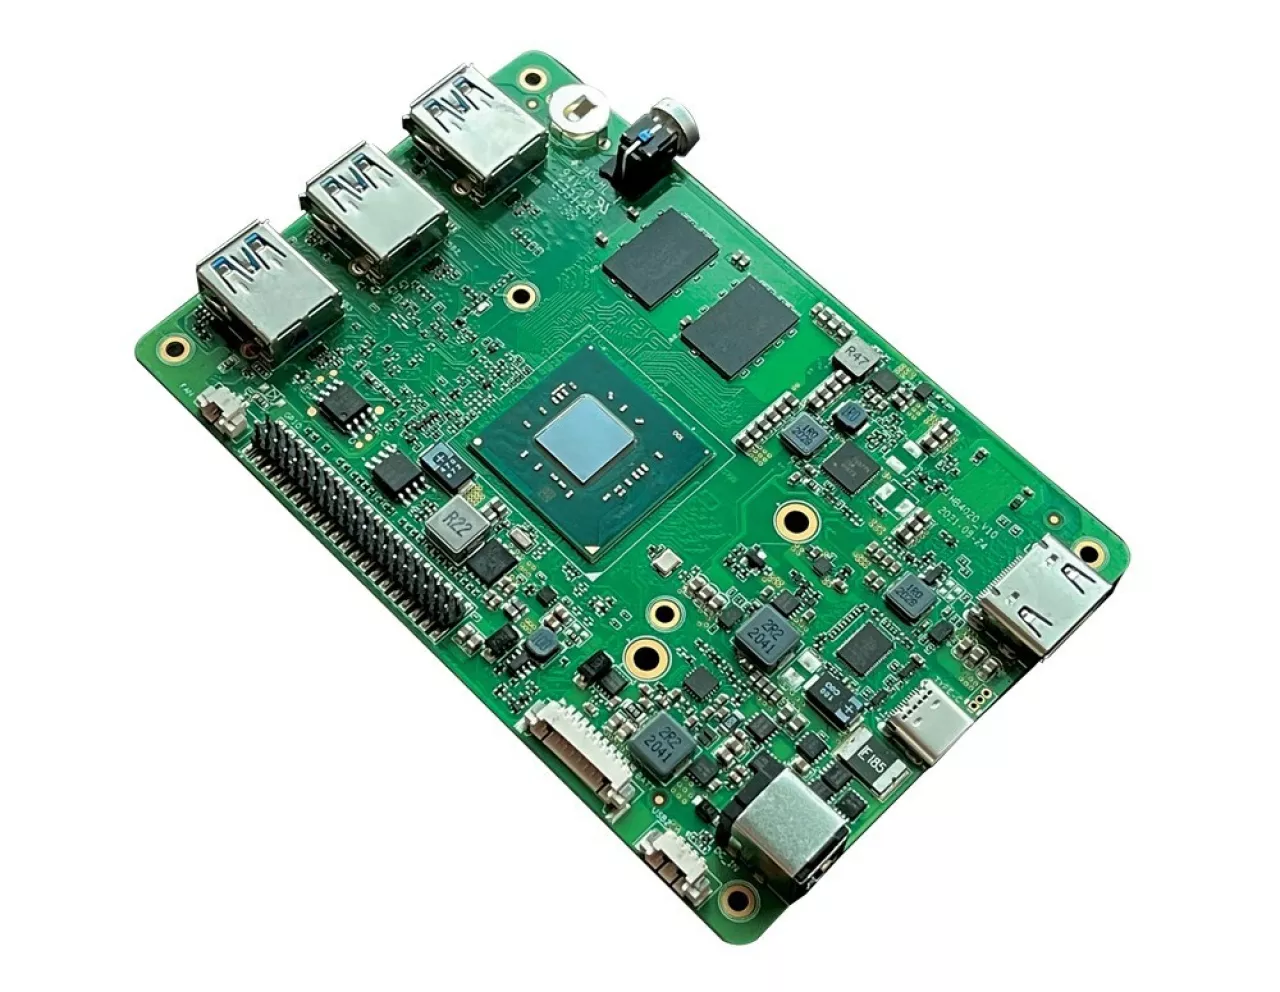 Hackboard 2 is a versatile, affordable single-board computer about the size of a smartphone but with the power of a desktop computer. It is ideal for use with Internet of Things (IoT) projects, maker projects, work-from-home, remote students and more. With an Intel processor and Windows 11 Pro, it can do virtually anything a traditional desktop PC can do — and more — at a fraction of the cost. What will you make with your Hackboard? img#1